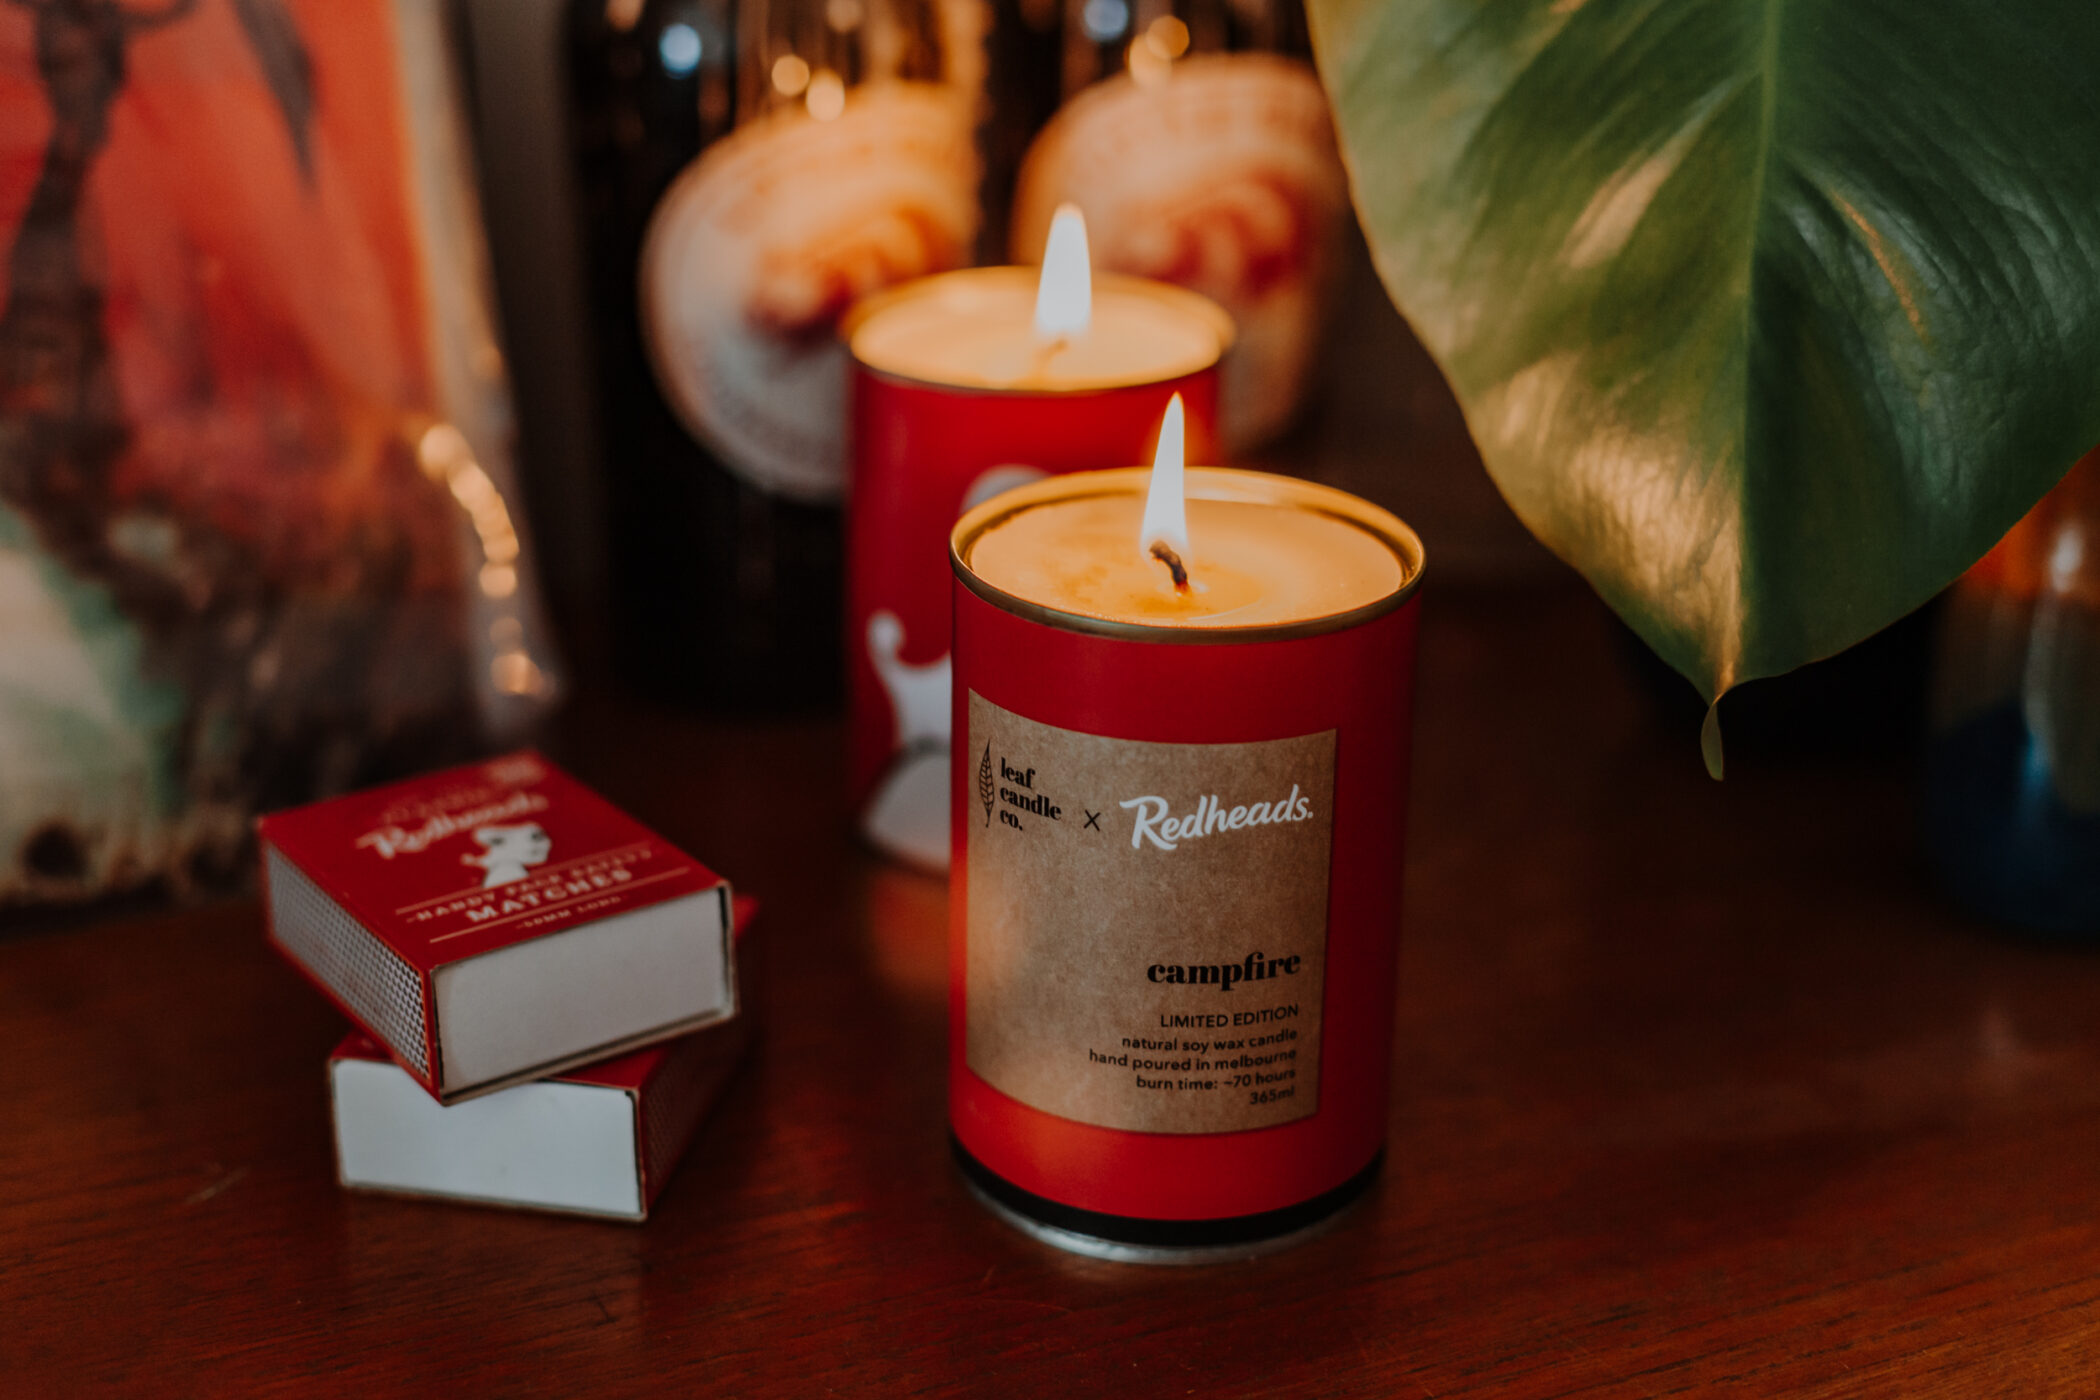 Love Merri-bek – Local candle maker collaborates with iconic Aussie brand, Redheads